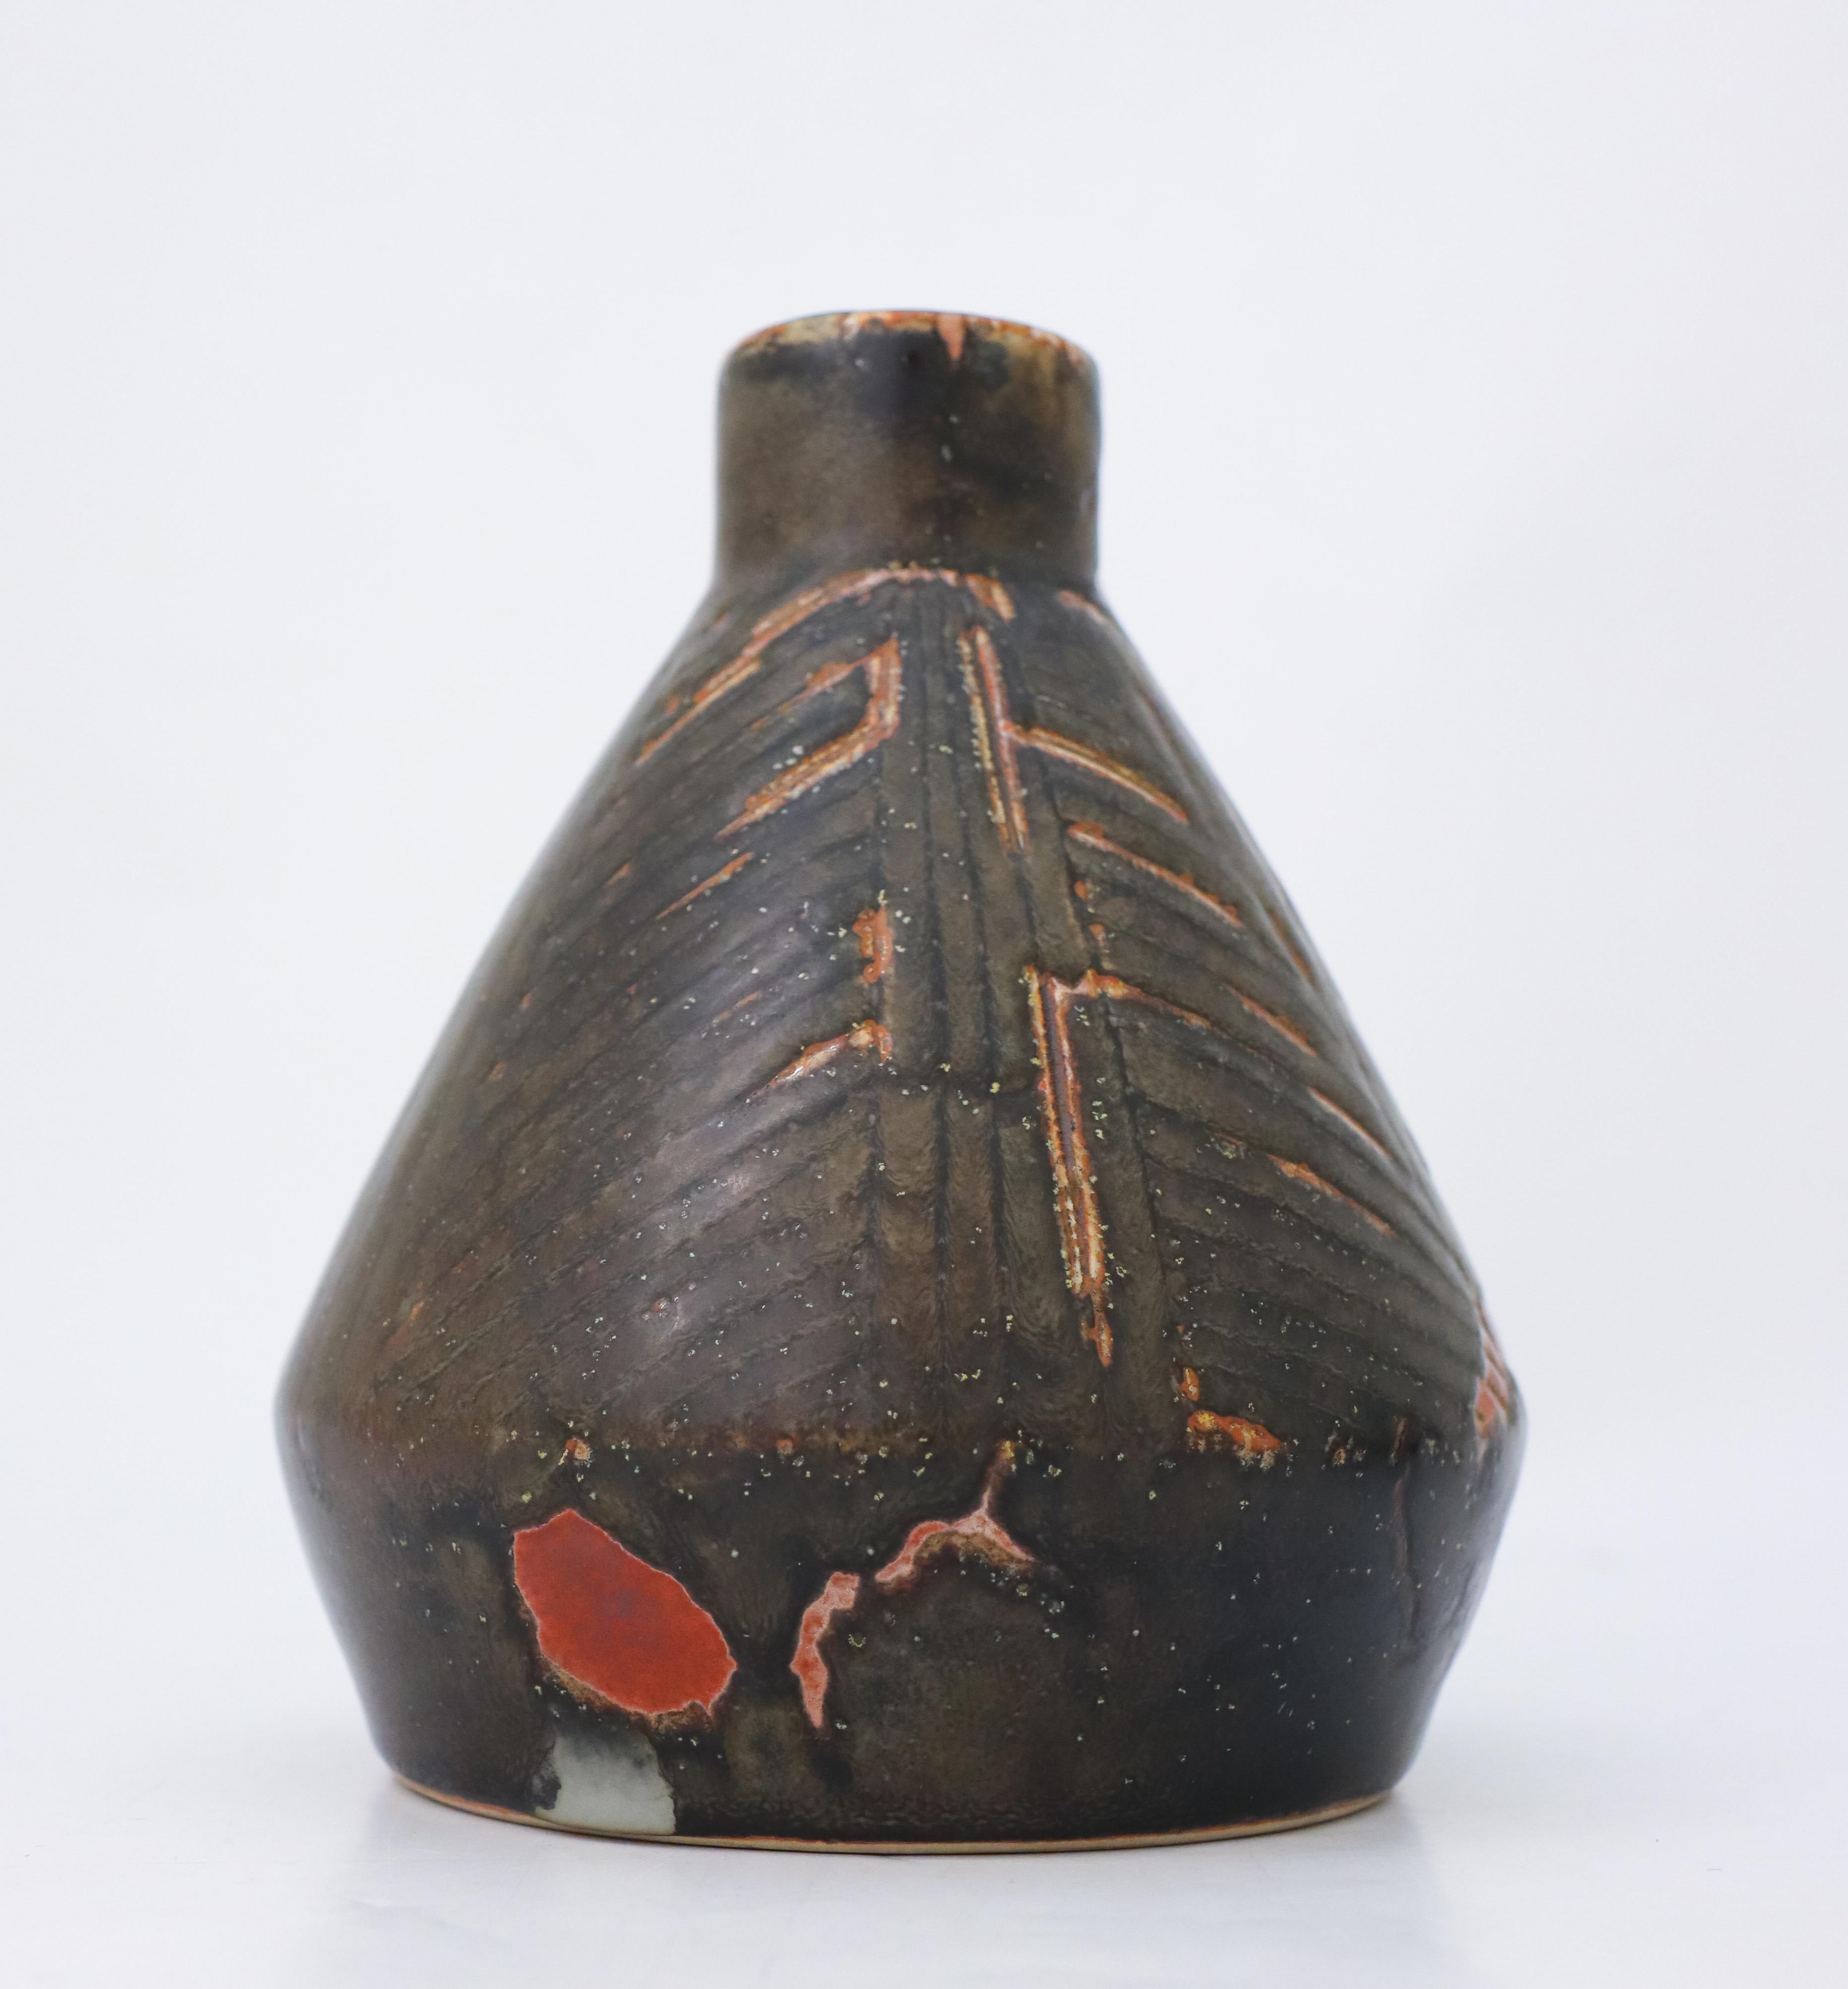 A black vase with some minor red color designed by Carl-Harry Stålhane at Rörstrand, It is 18 cm (7.2